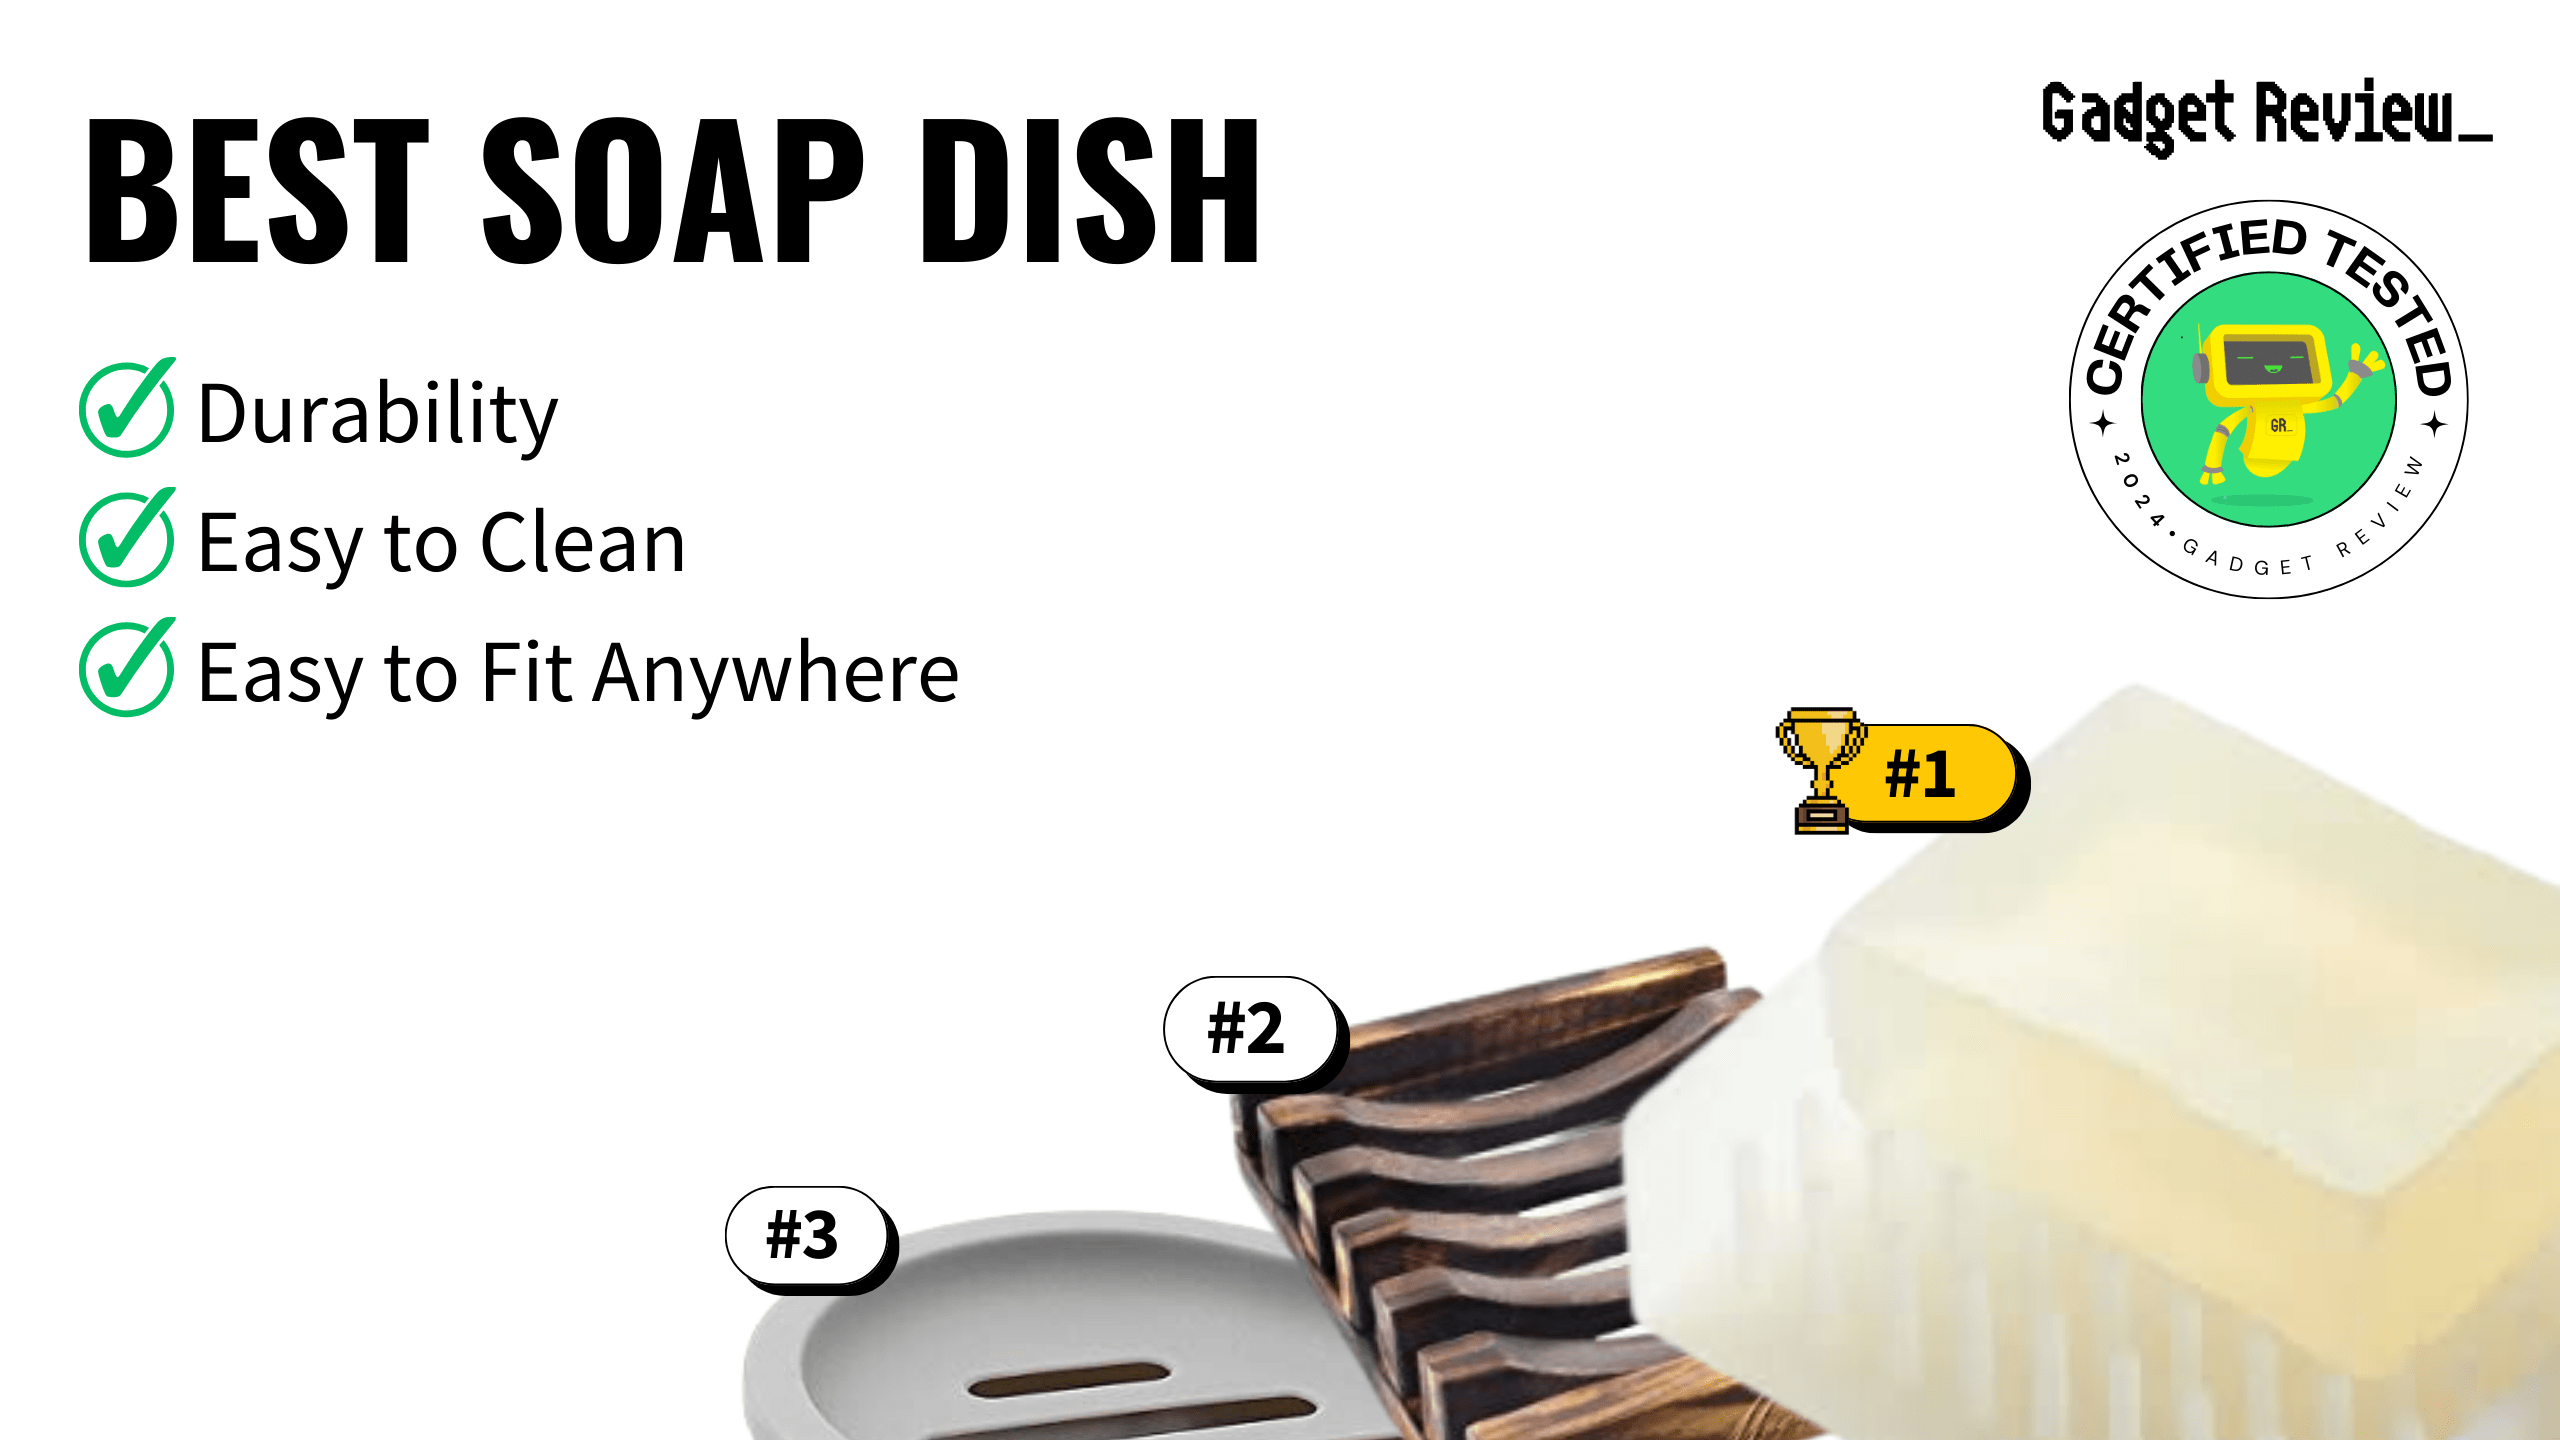 best soap dish guide that shows the top best kitchen product model